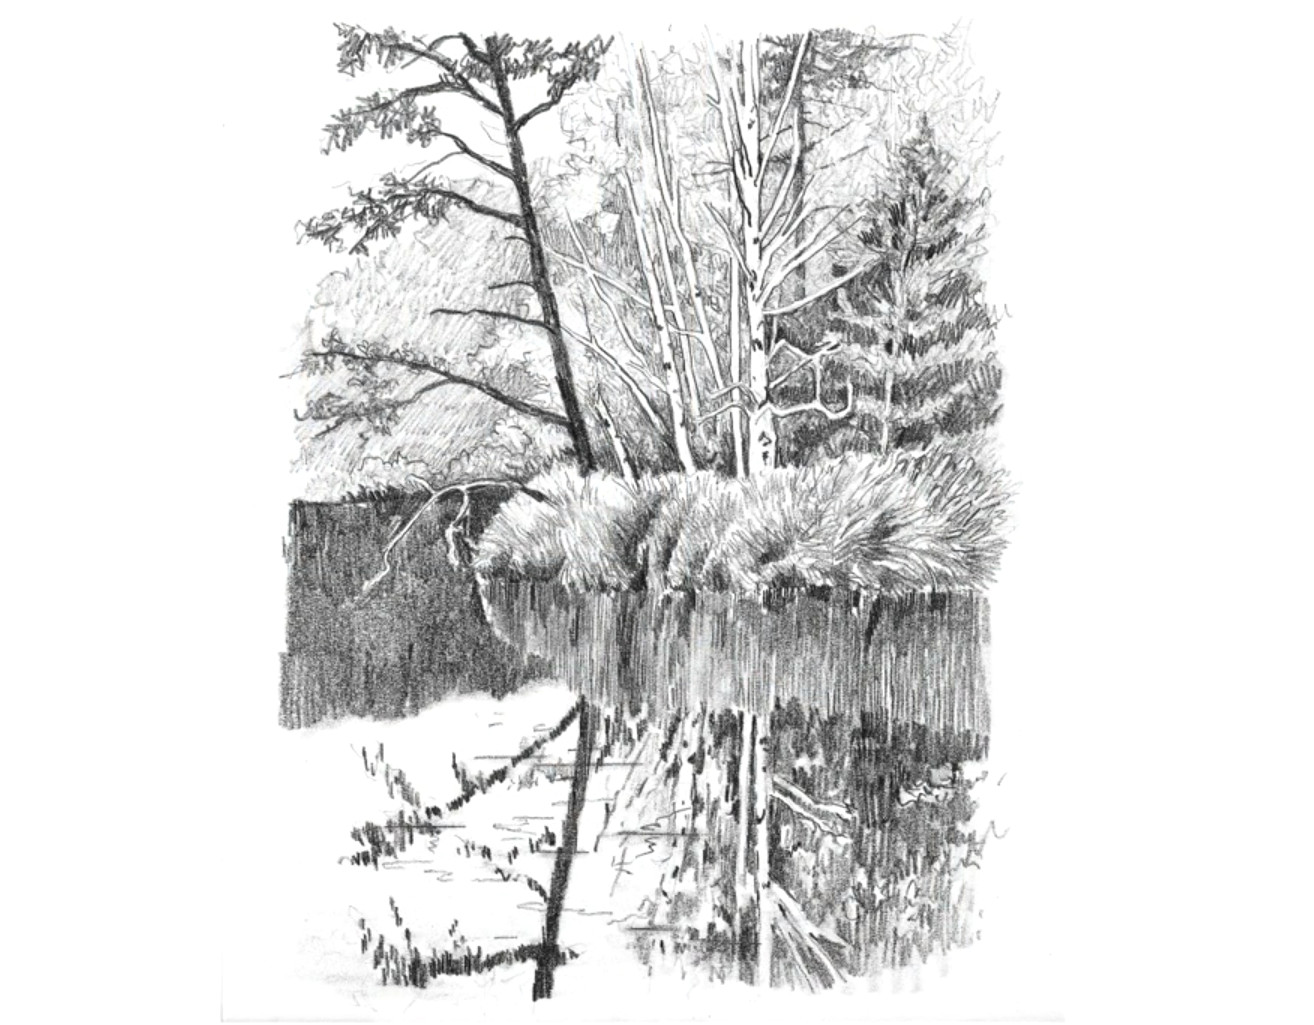 6 ways to spruce up your landscape pencil drawings artists network